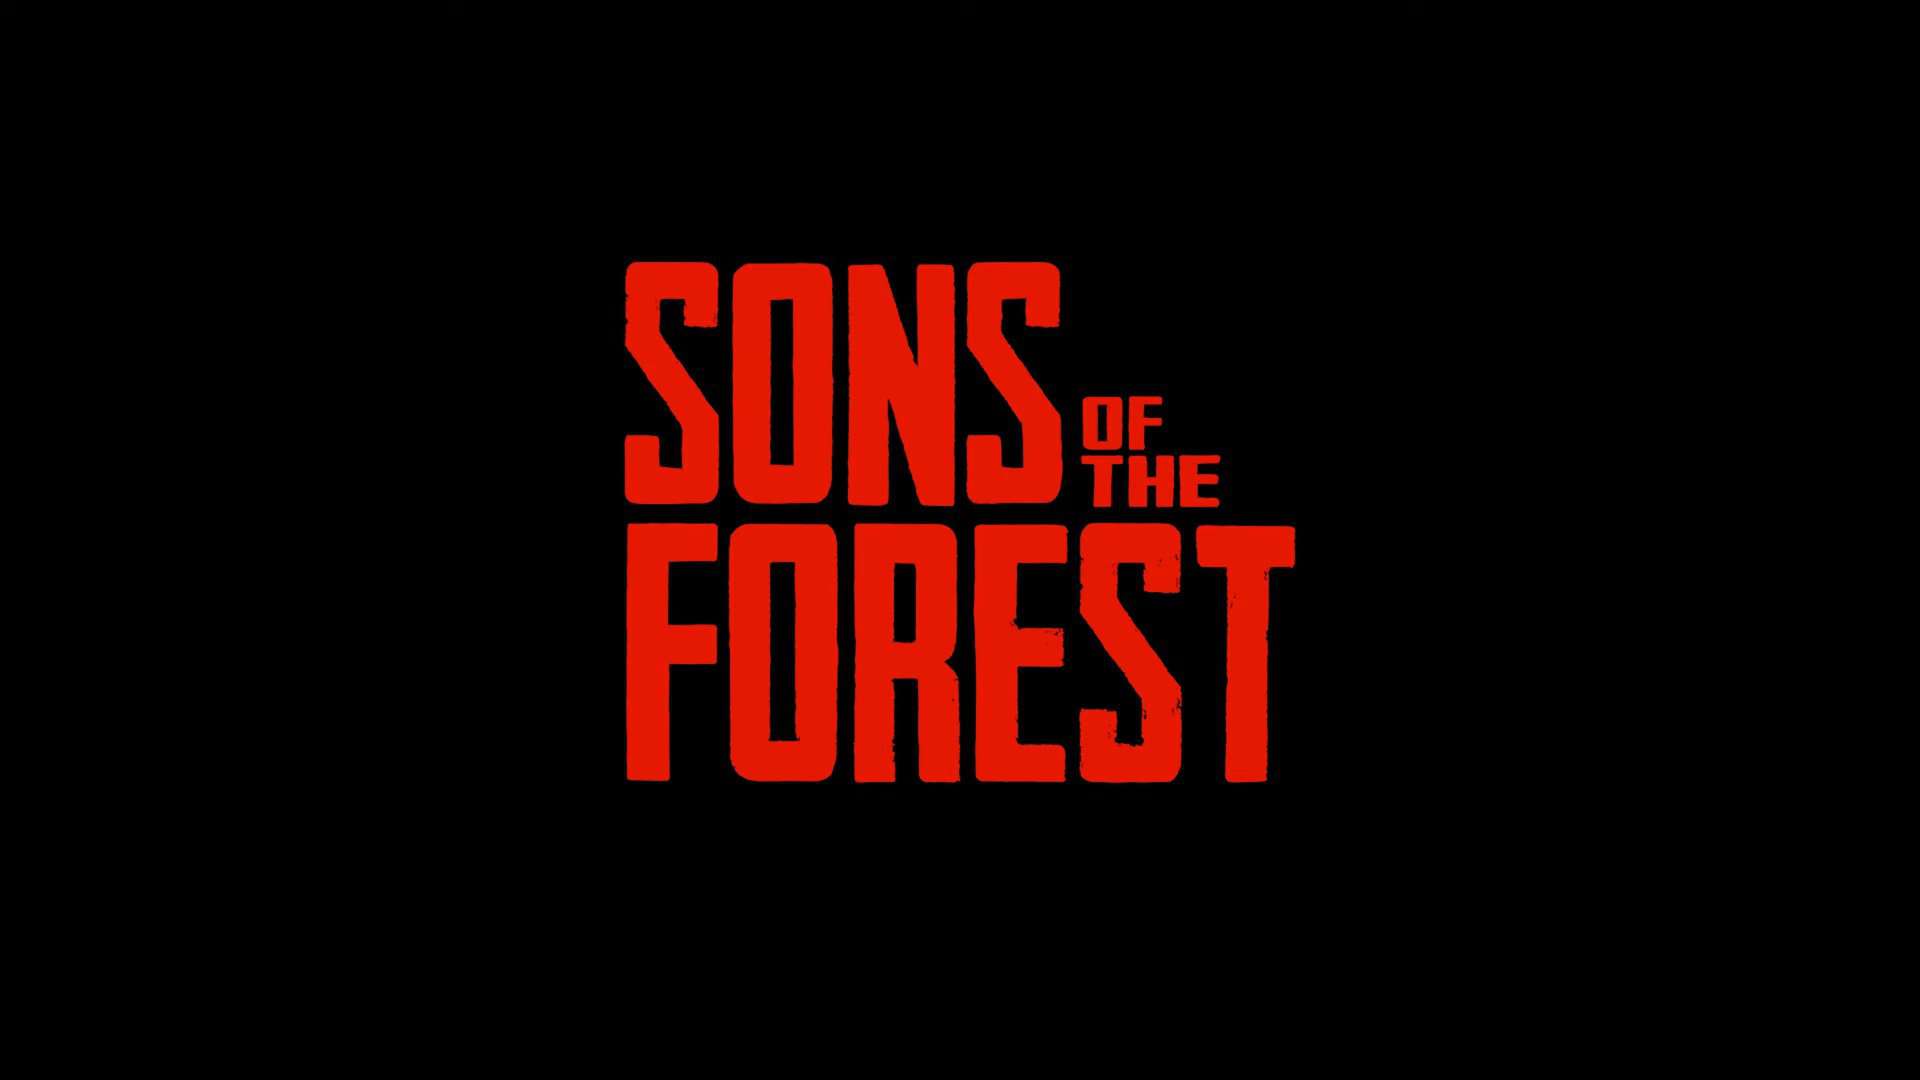 Best Sons of the Forest settings for an fps boost